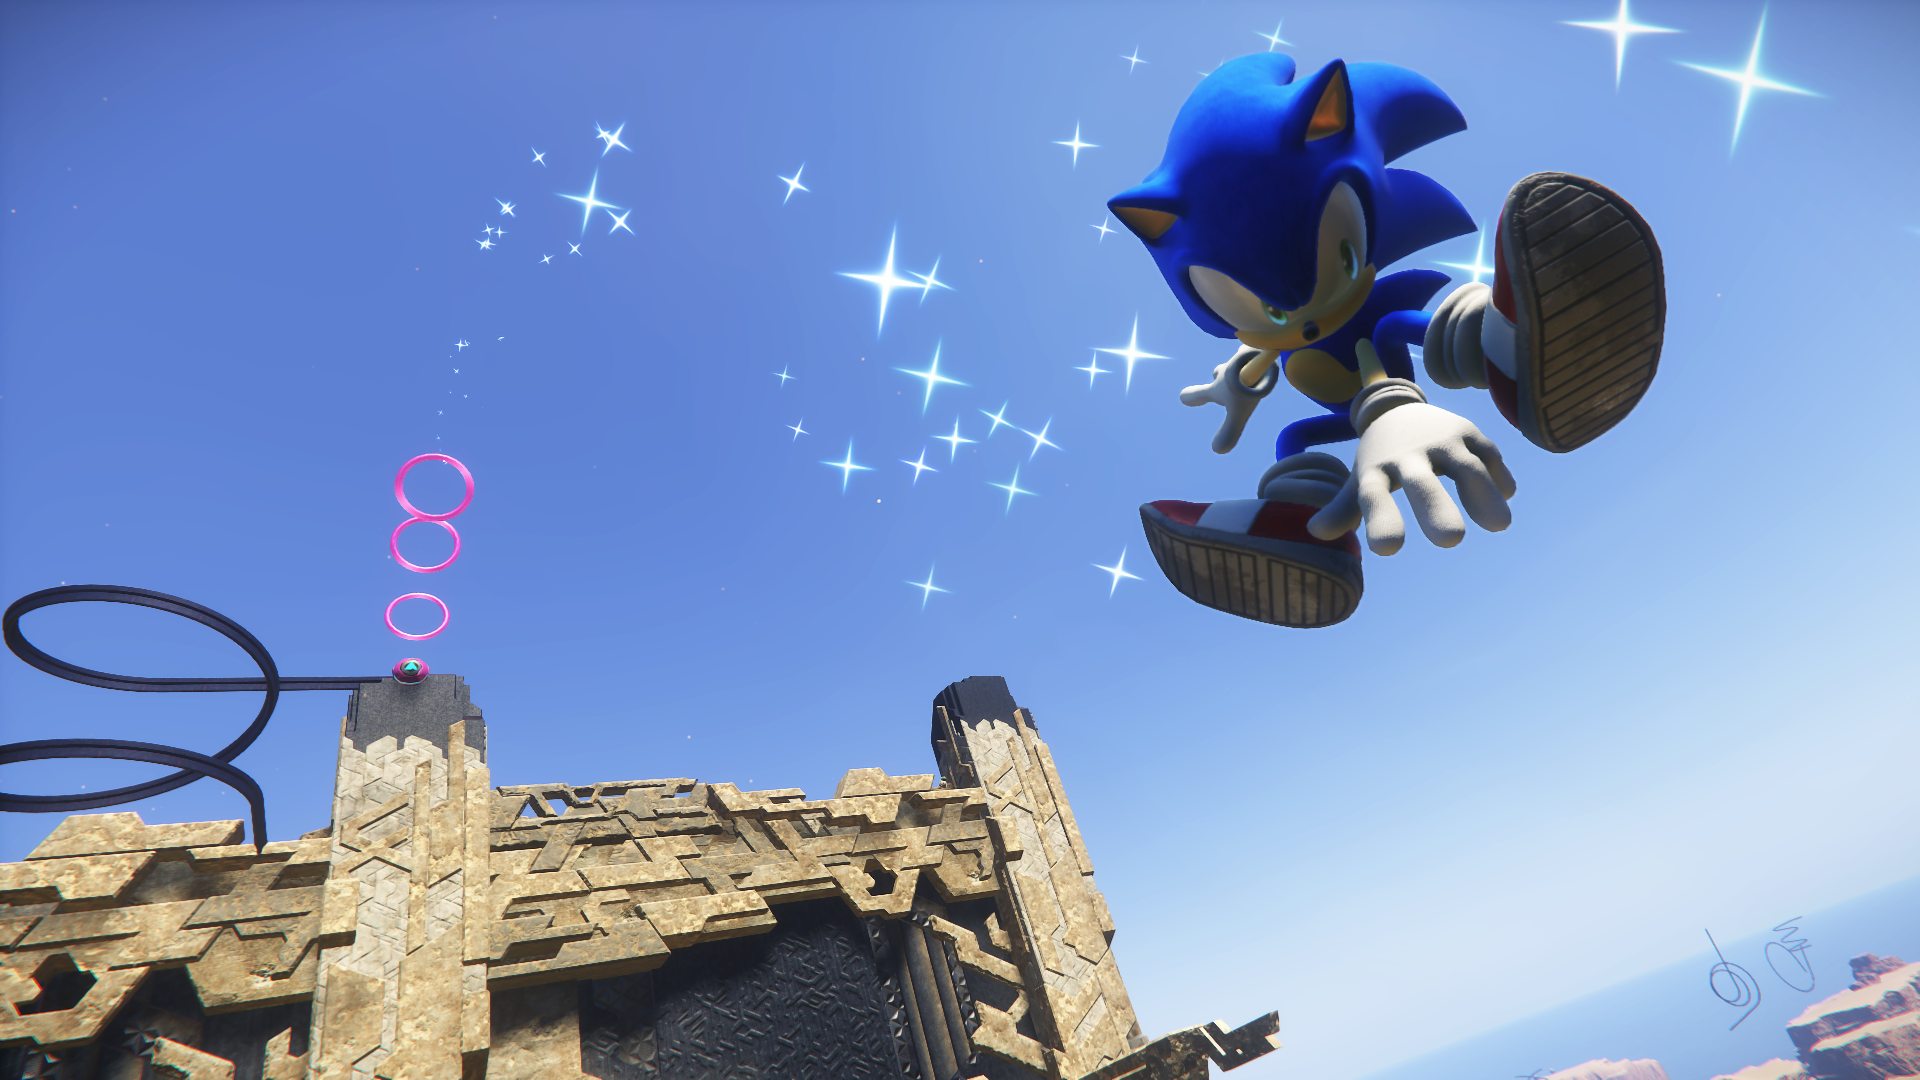 Sonic Forces Critic Reviews - OpenCritic